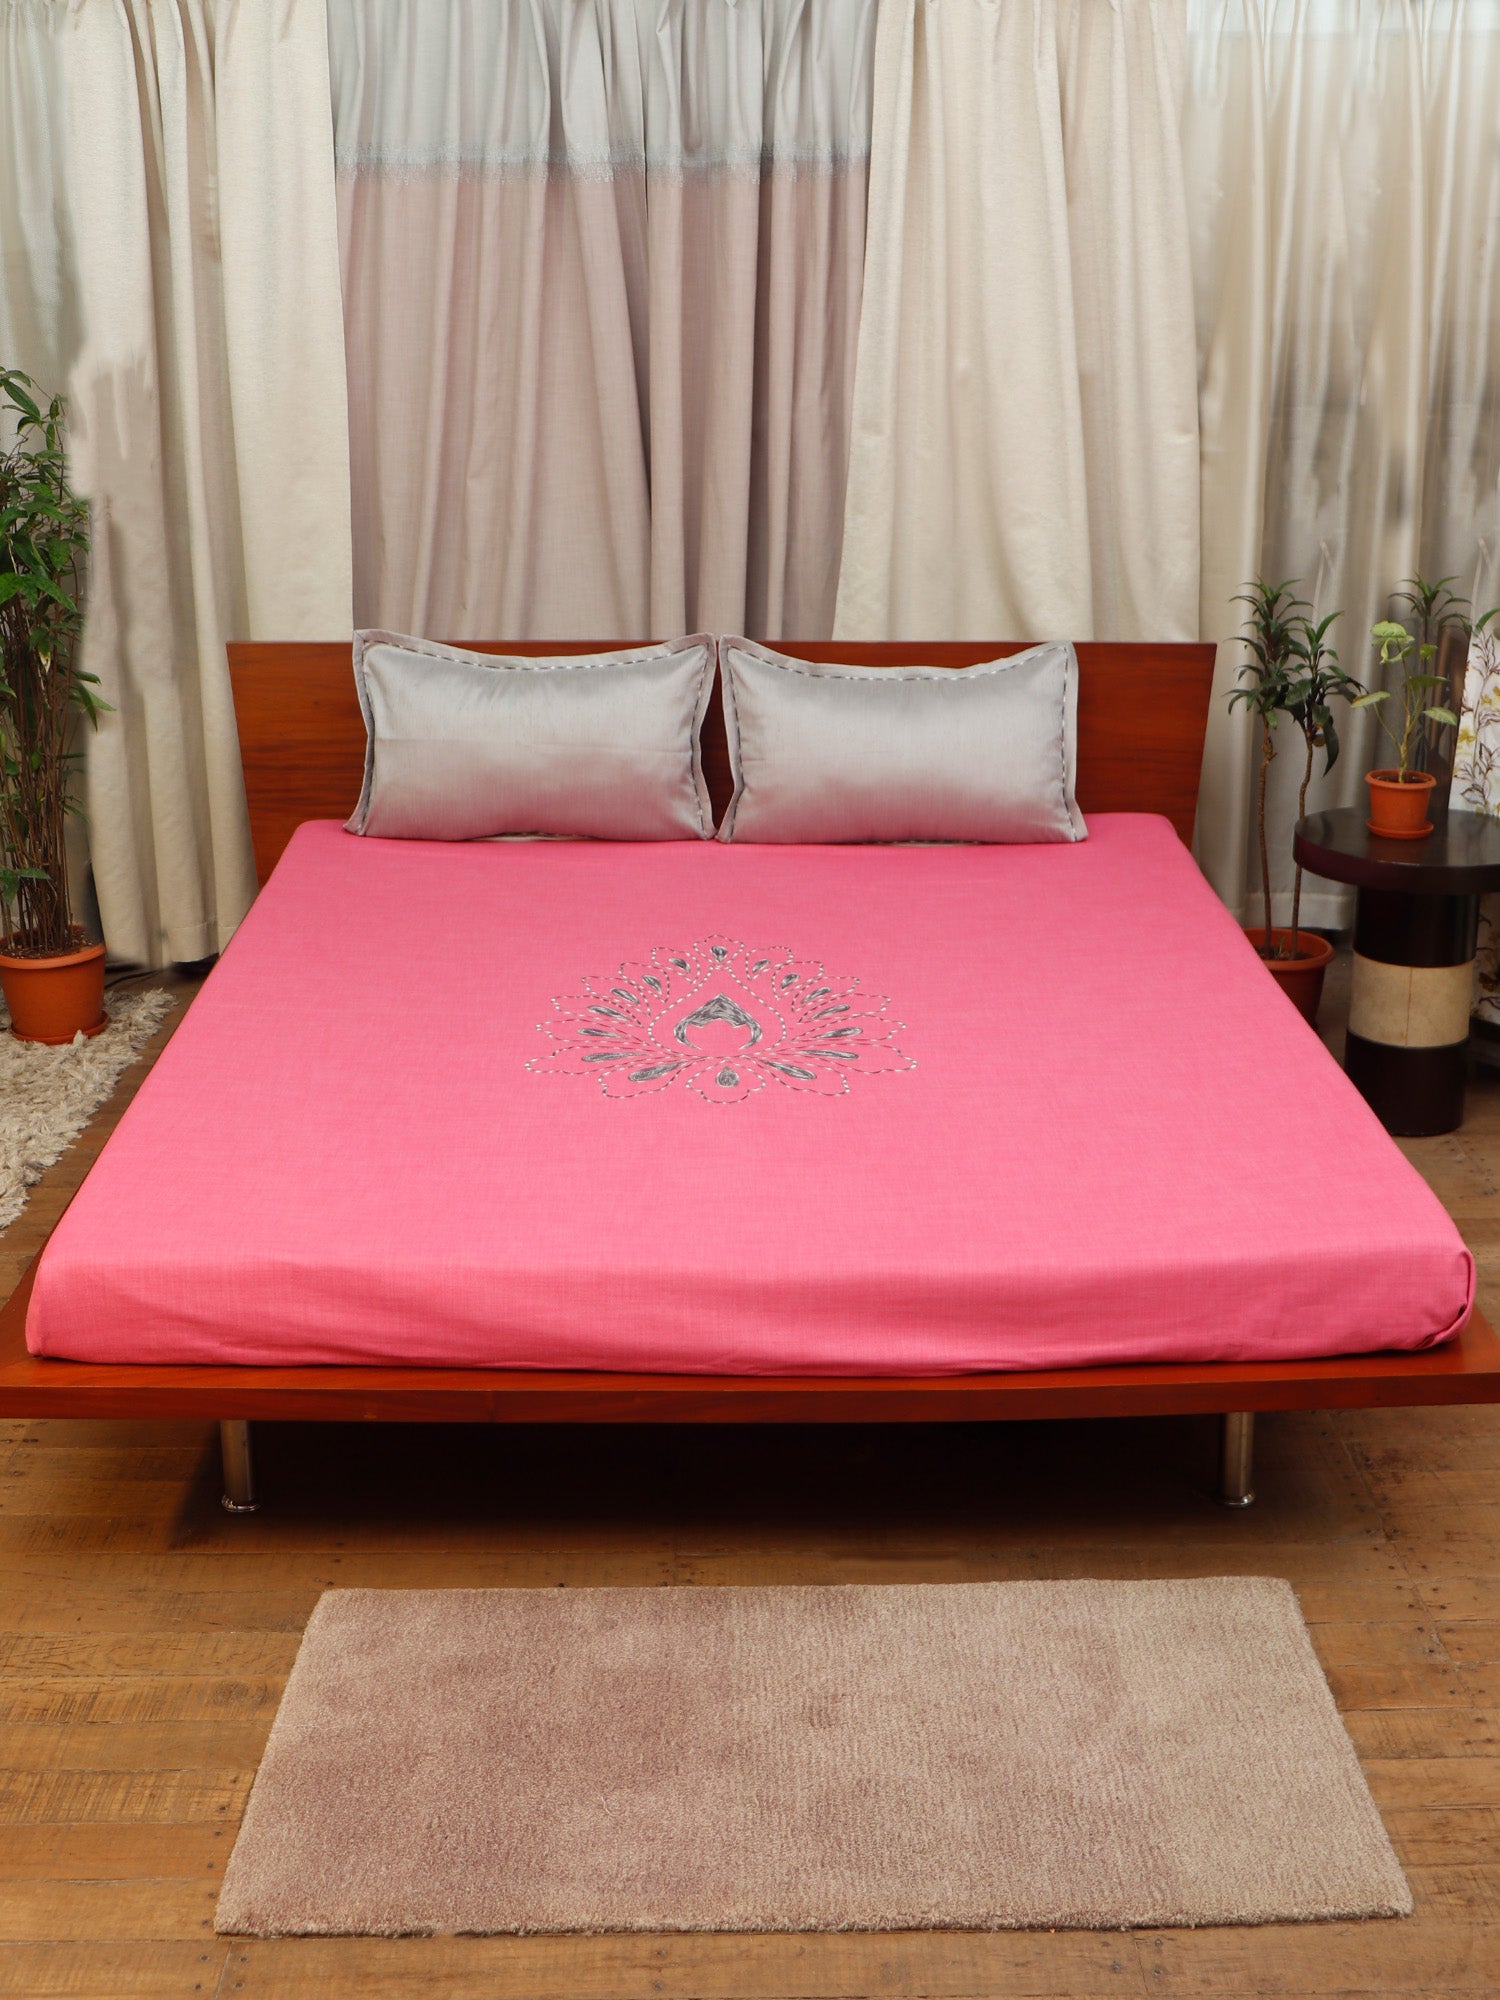 Embroidered Bedcover for Double Bed | Circular Aari Embroidery - Queen Size - Cotton Blend | Pink - Bed Cover 90 x 108inches, Pillow 17x27in